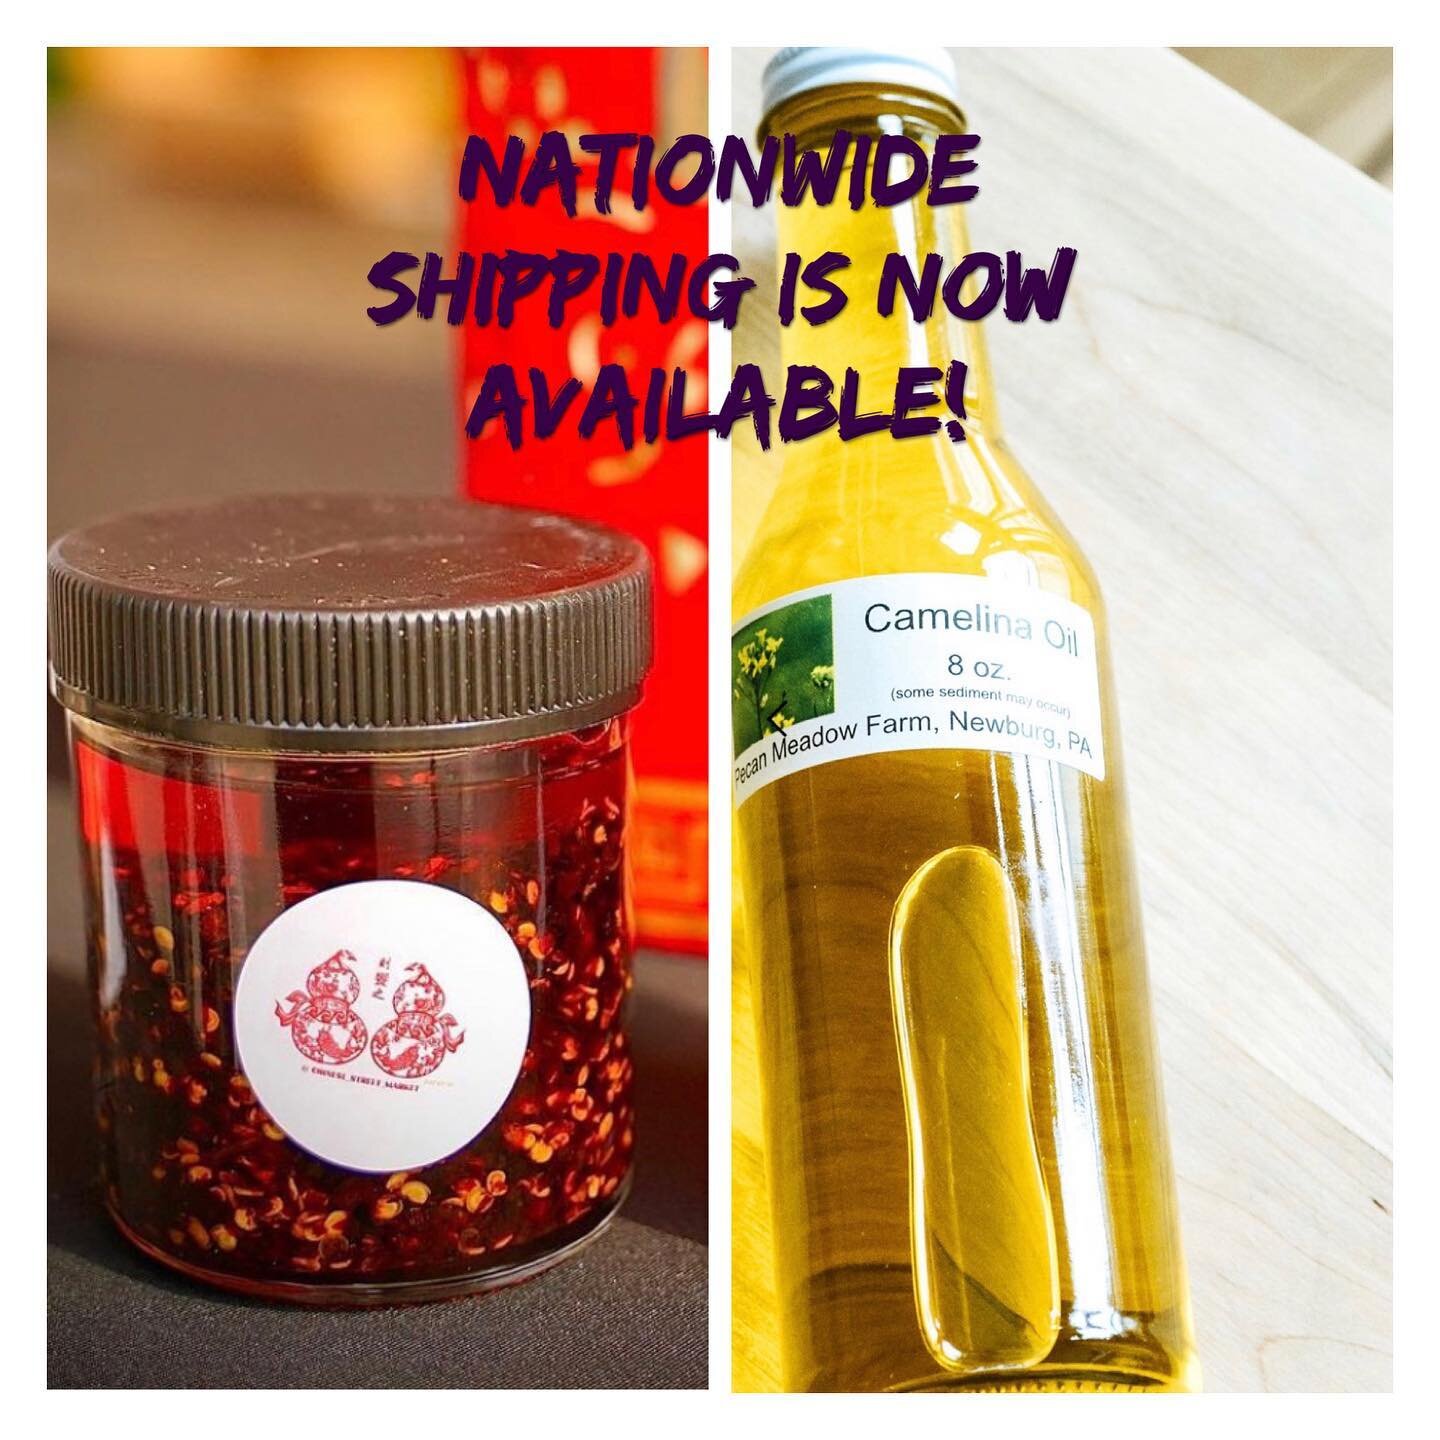 📌excited to share this annoucement with two of our partners. We have been asked by people across the US about shipping this delicious chili oil. Now, it is happening🔆Our friend @teaism_dc is helping us with shipping these chili oil jars to you nati